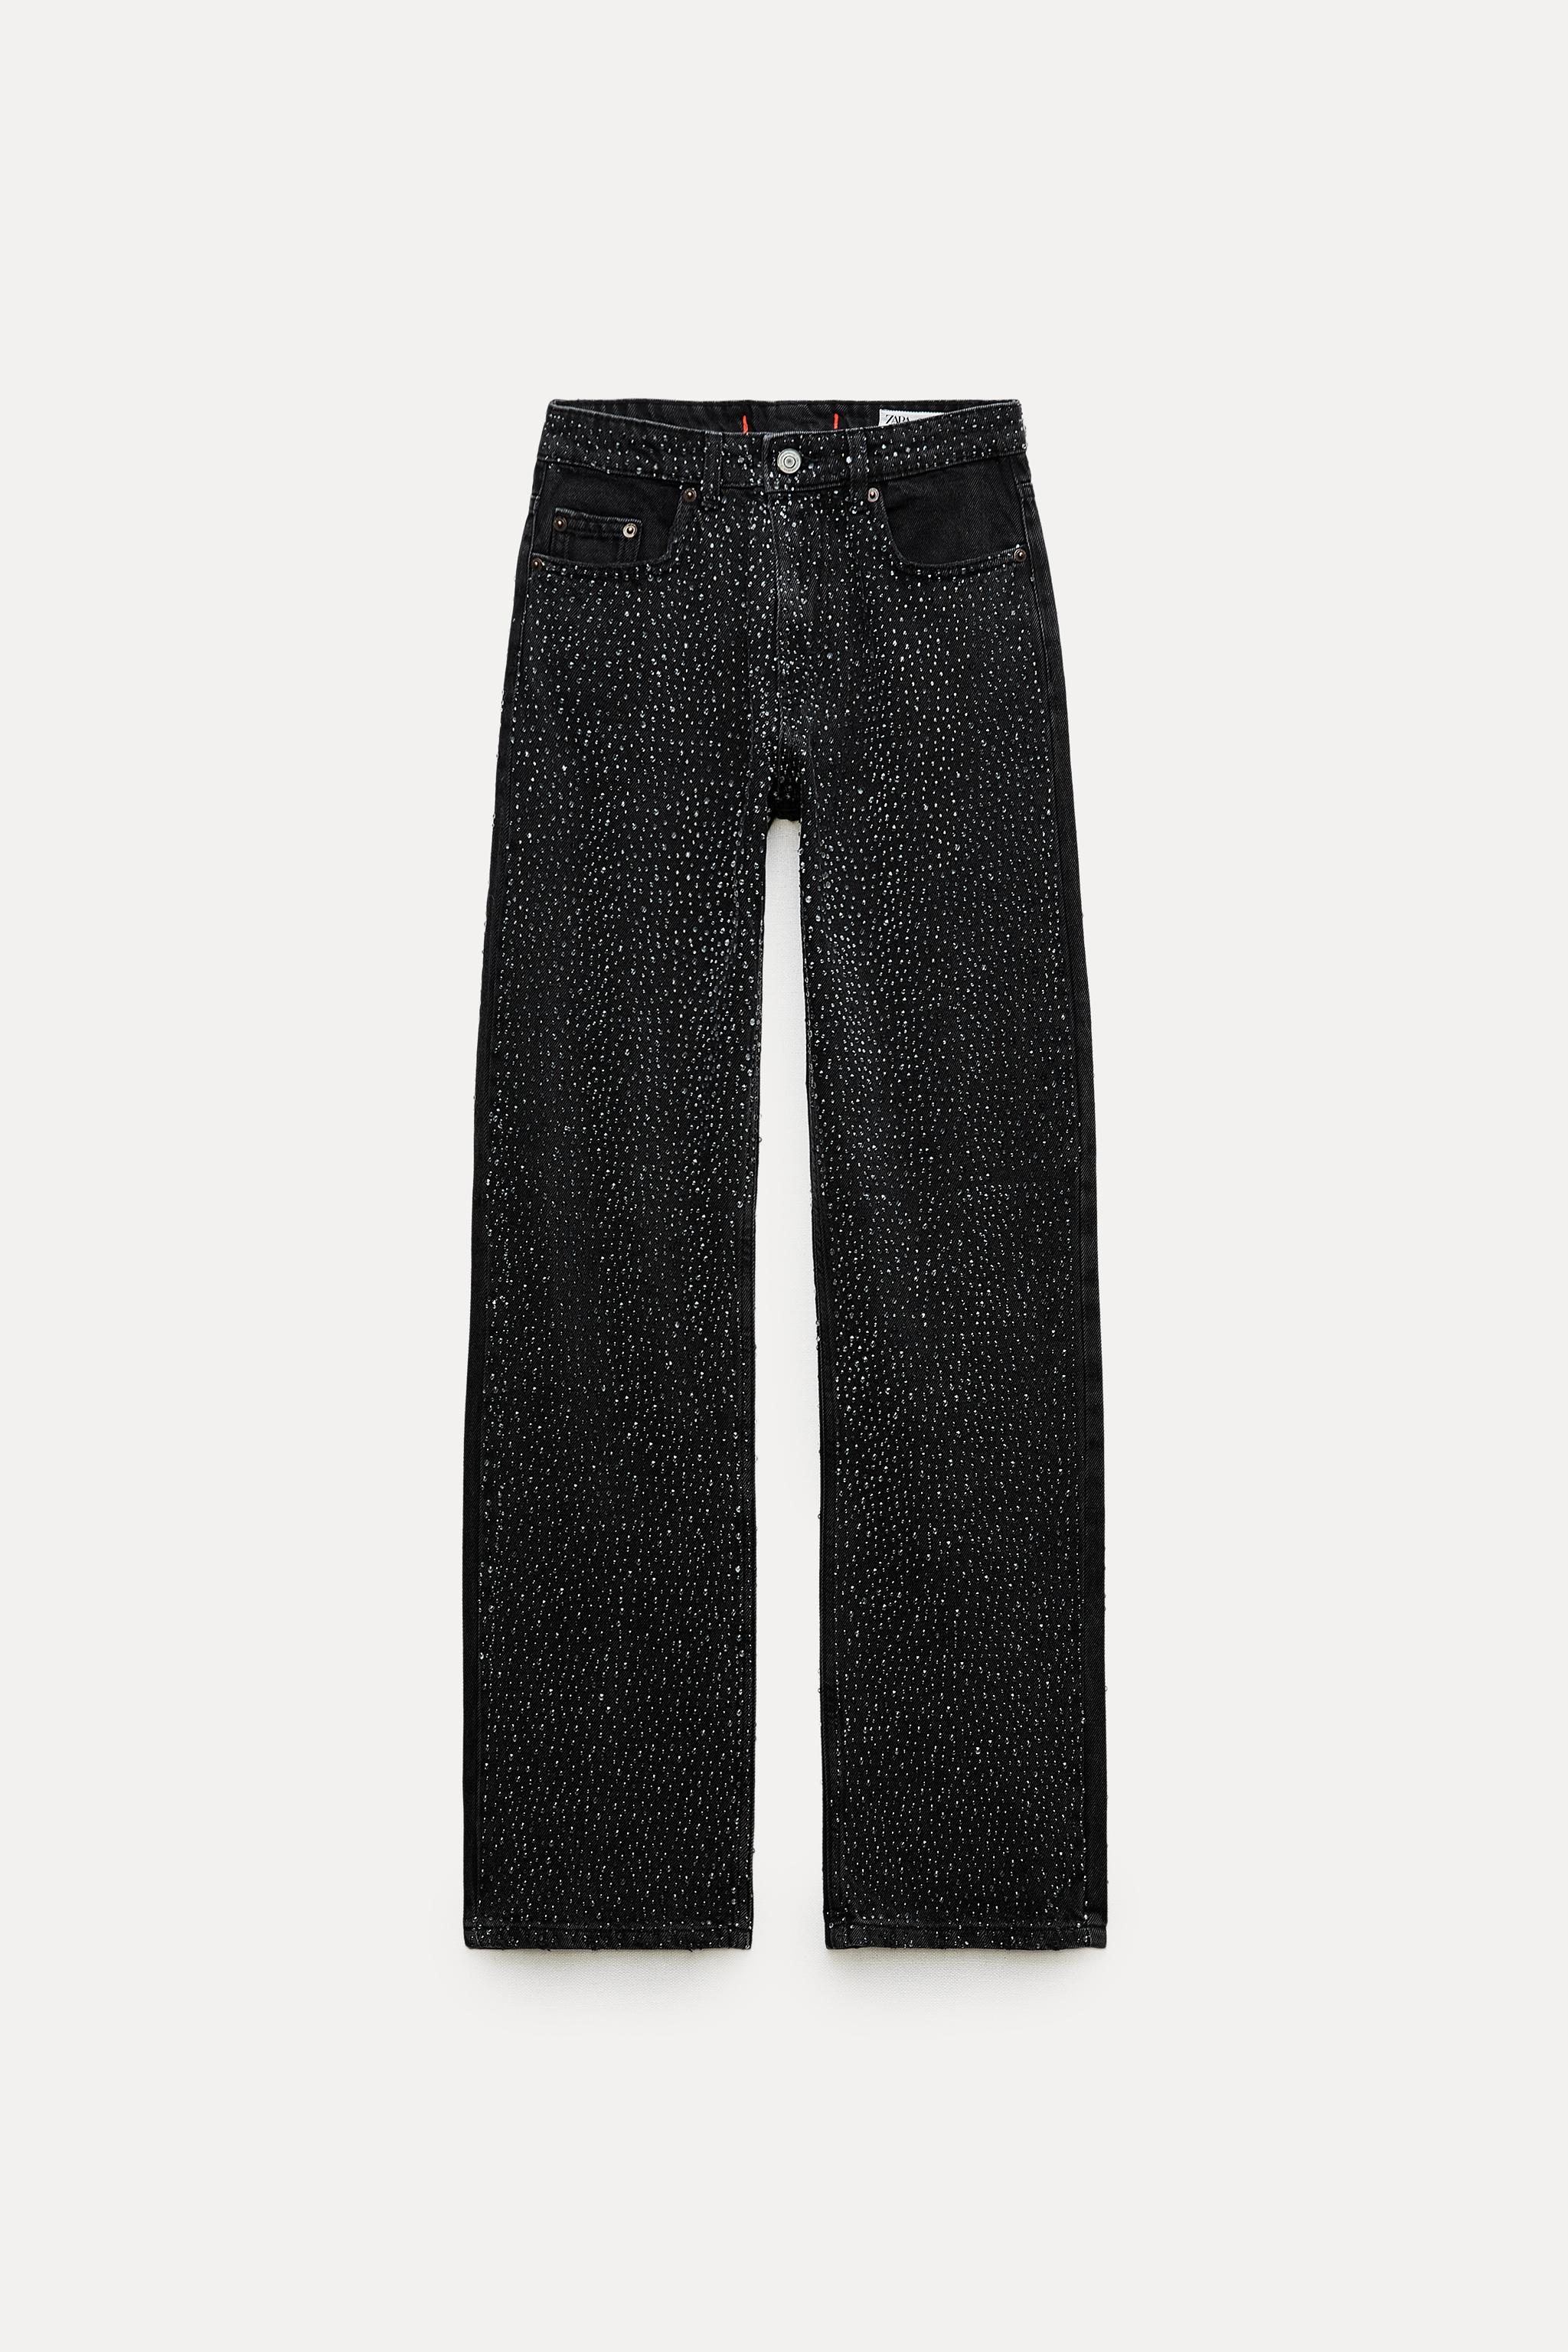 STRAIGHT CUT MID RISE RHINESTONE JEANS ZW COLLECTION - Black